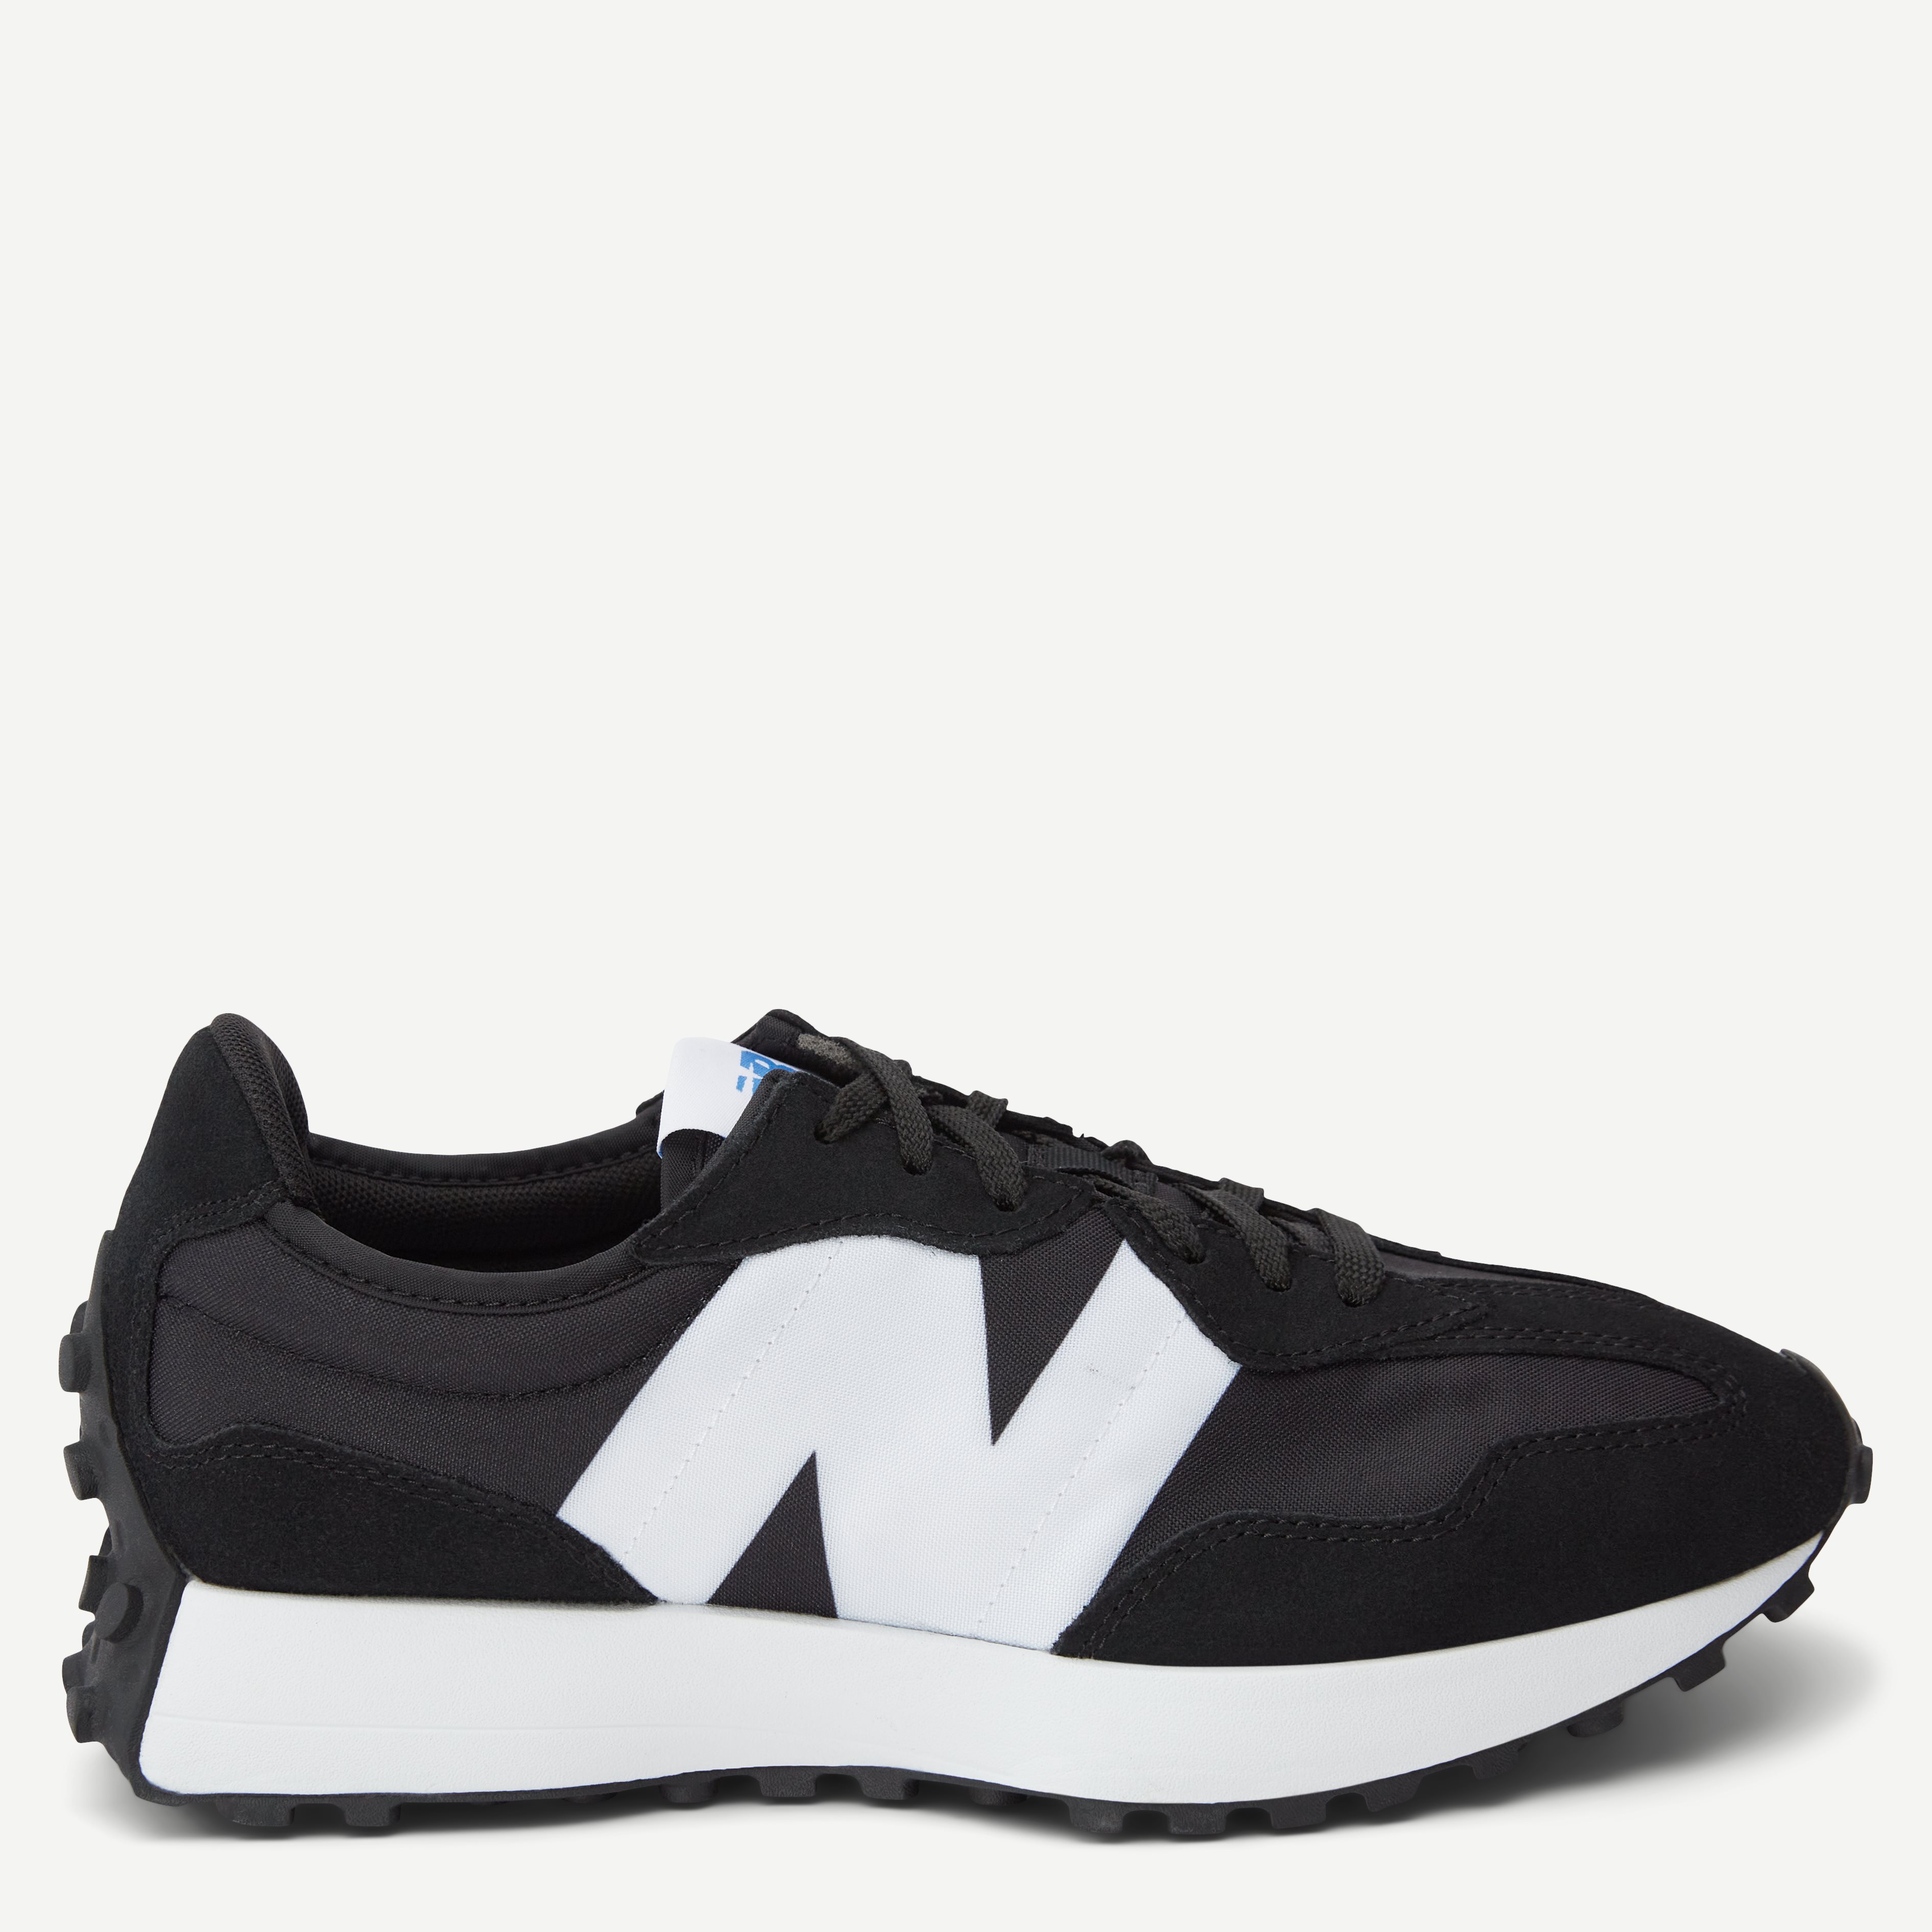 New Balance Shoes MS327 CPG Black